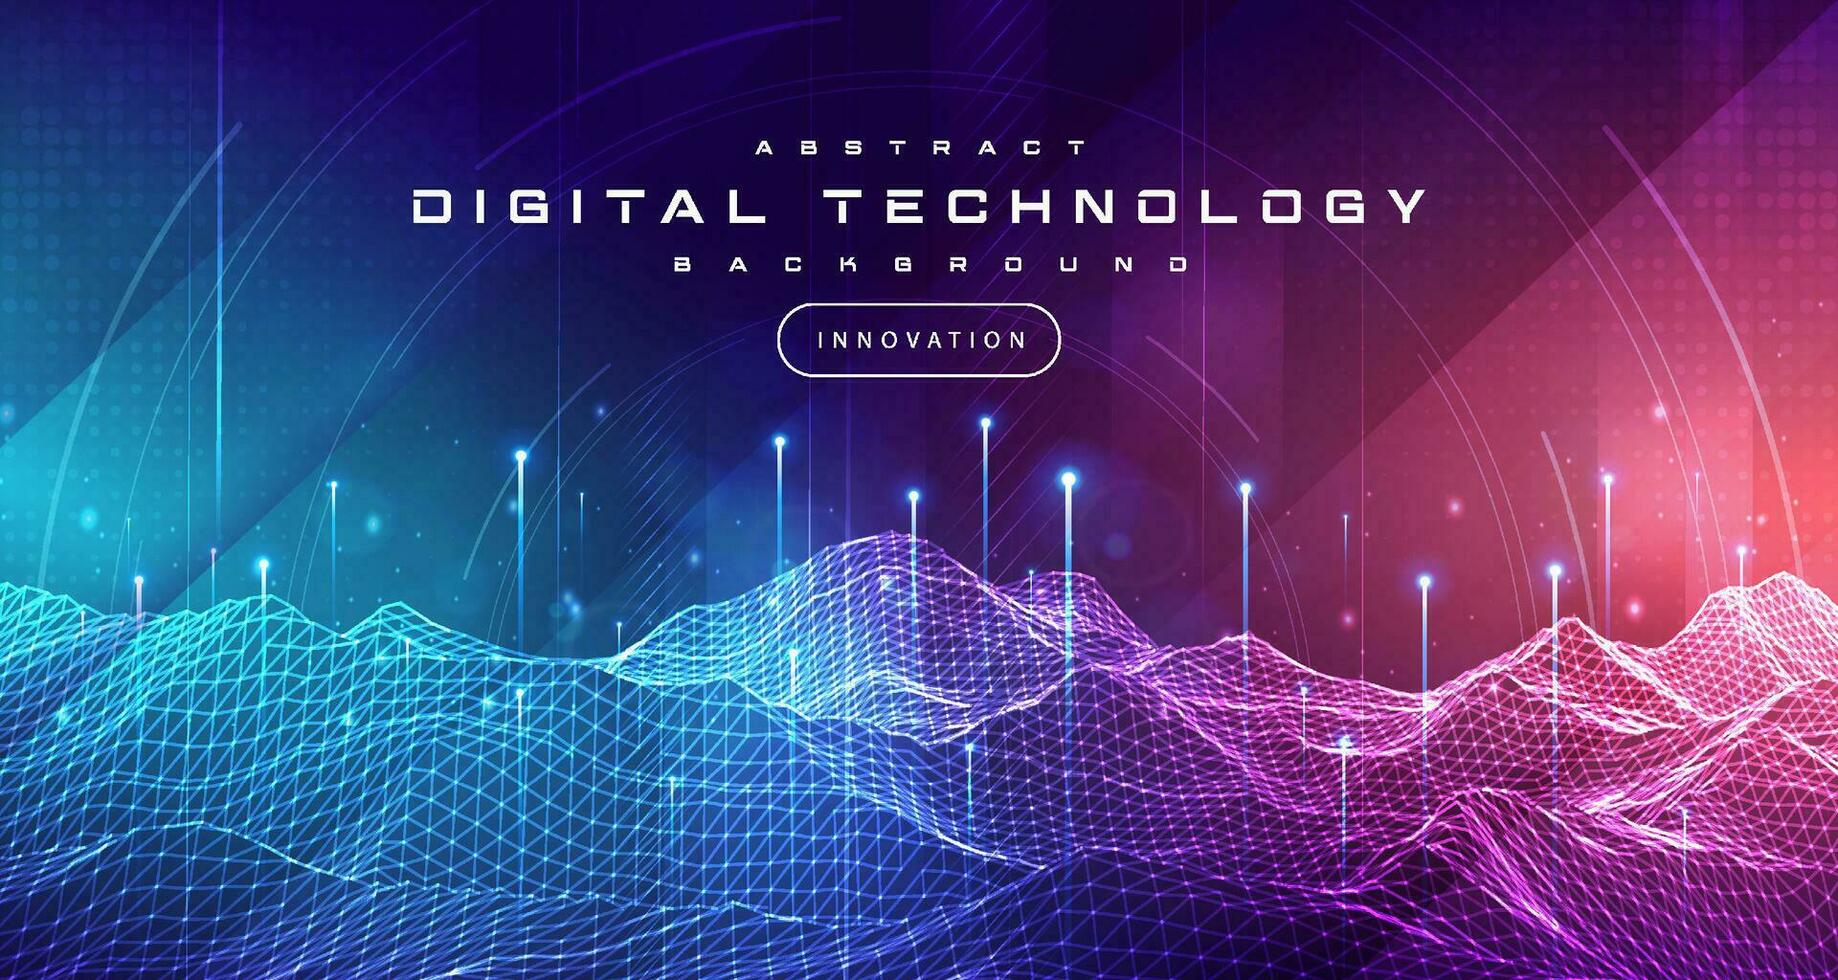 Digital technology metaverse neon blue purple background, cyber information, abstract speed connect communication innovation future meta tech, internet network connection, Ai big data, illustration 3d vector